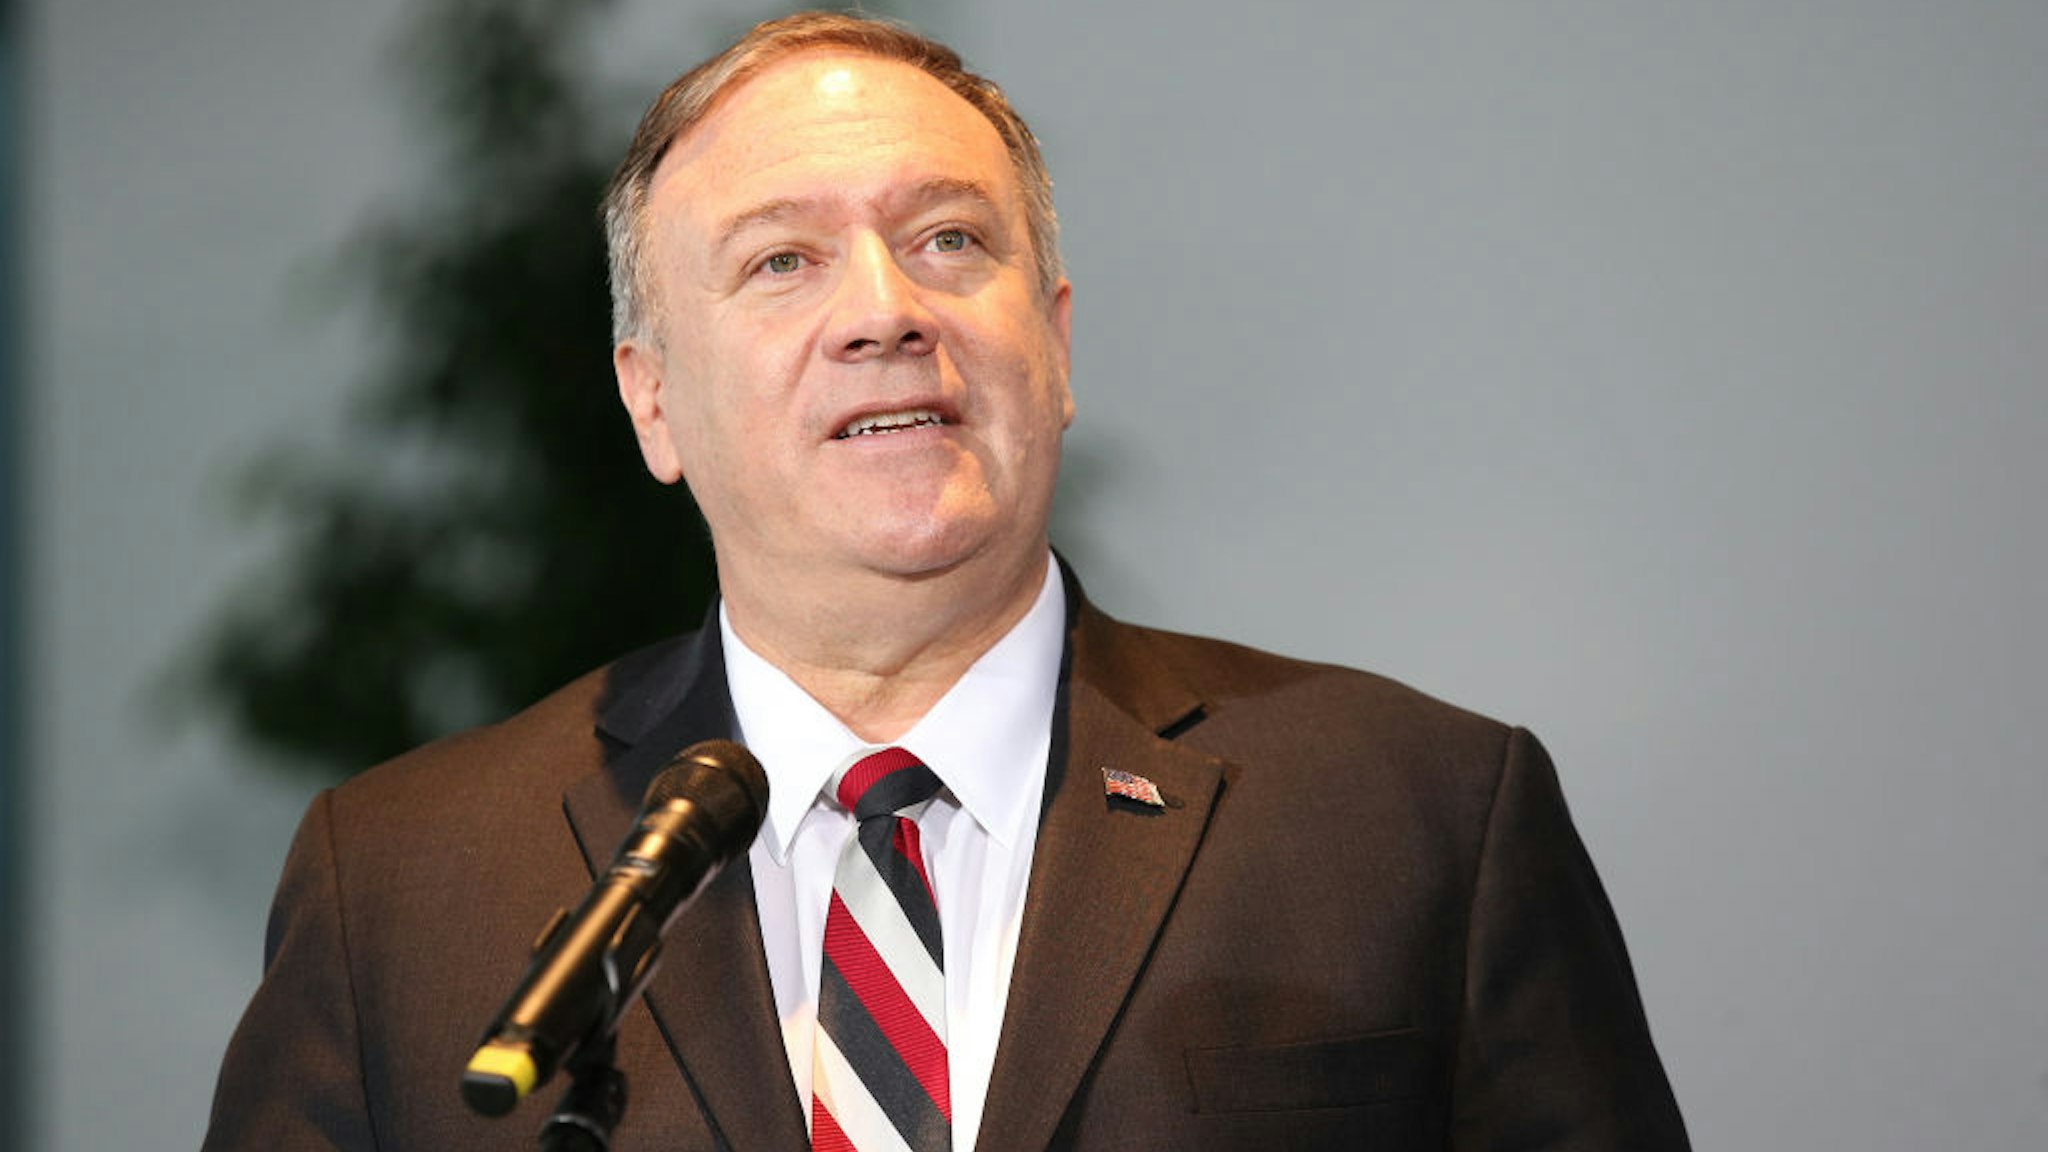 U.S. Secretary of State Mike Pompeo speaks during a press statement at the German Chancellery on November 8, 2019 in Berlin, Germany.